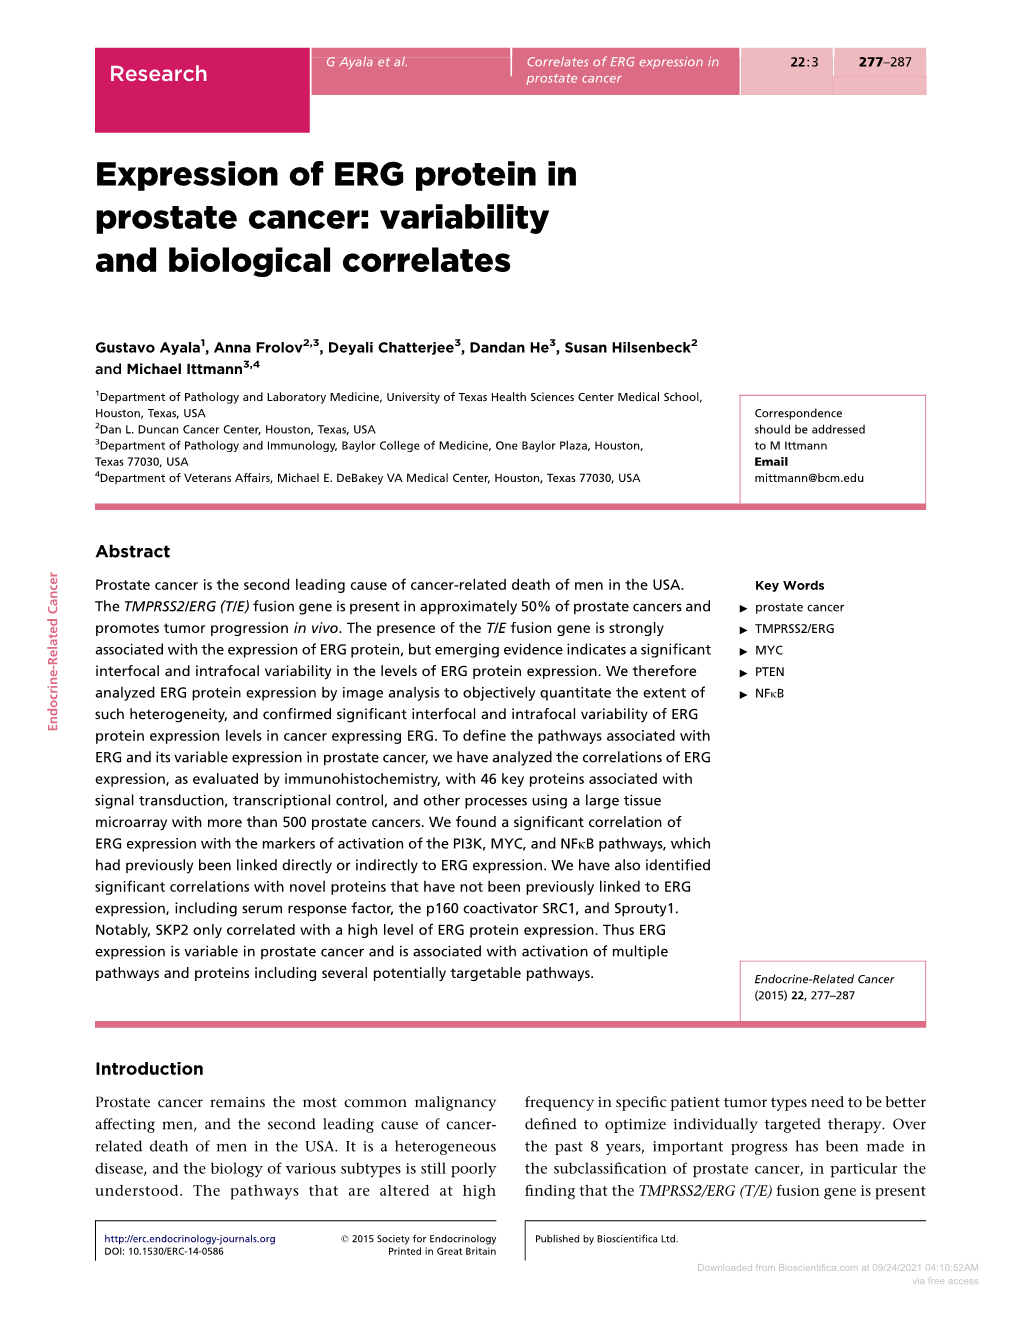 Expression of ERG Protein in Prostate Cancer: Variability and Biological Correlates